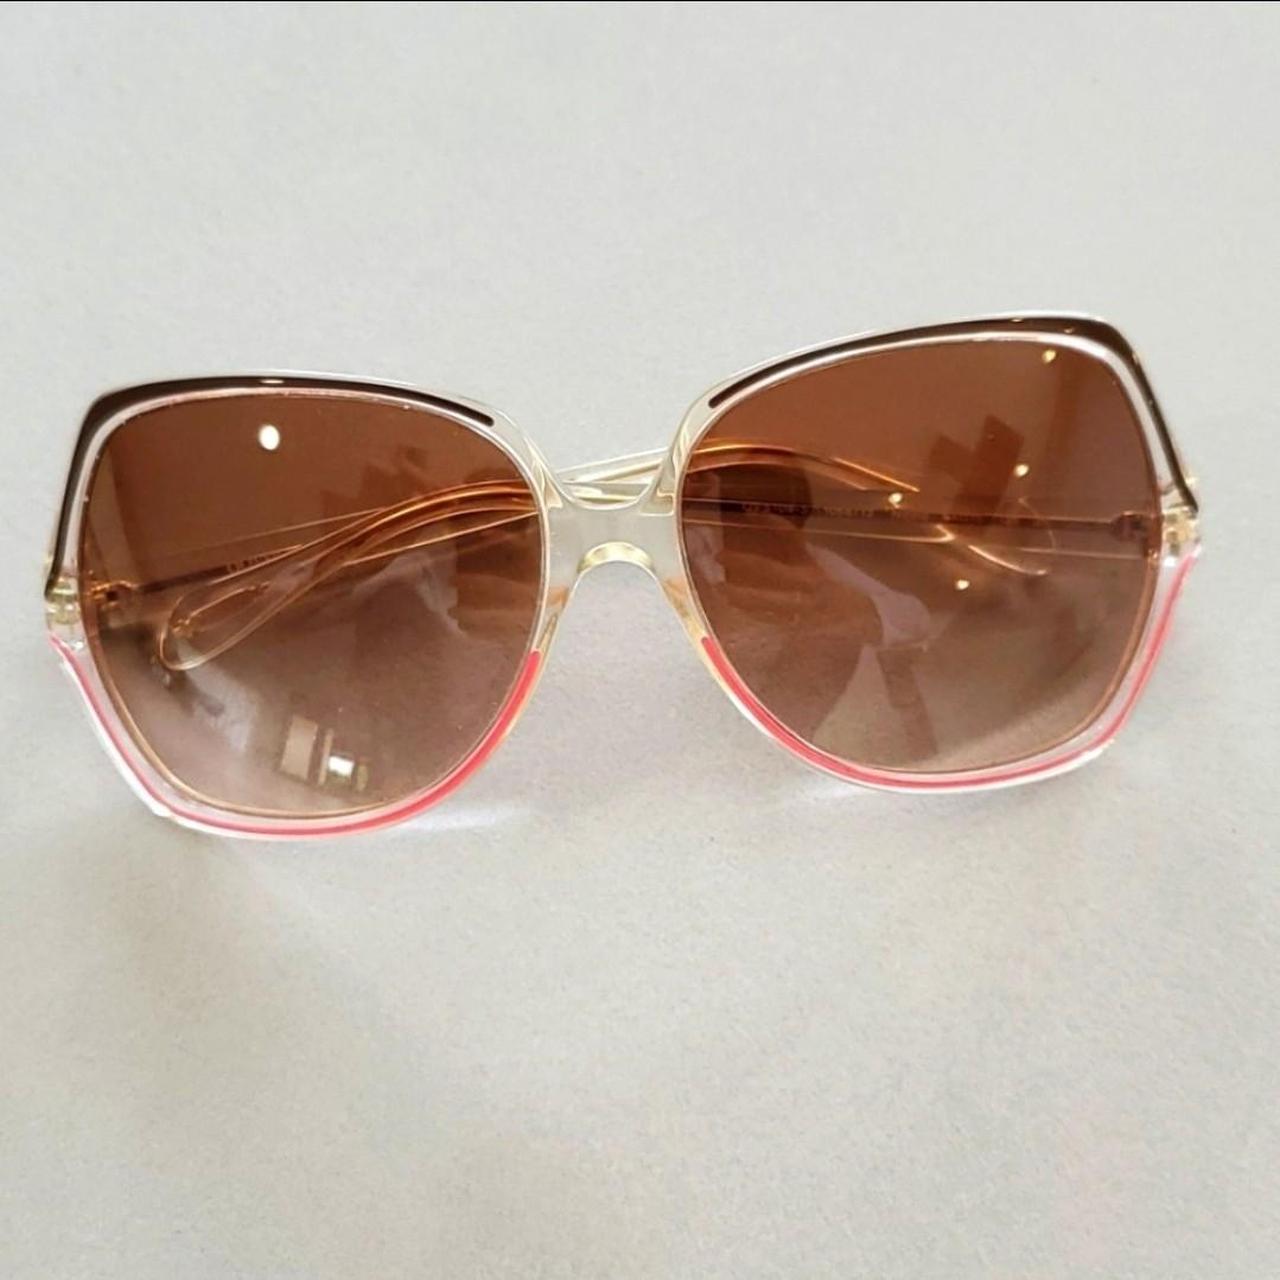 Product Image 3 - Oliver Peoples Oversized Sunglasses
Flawless condition,